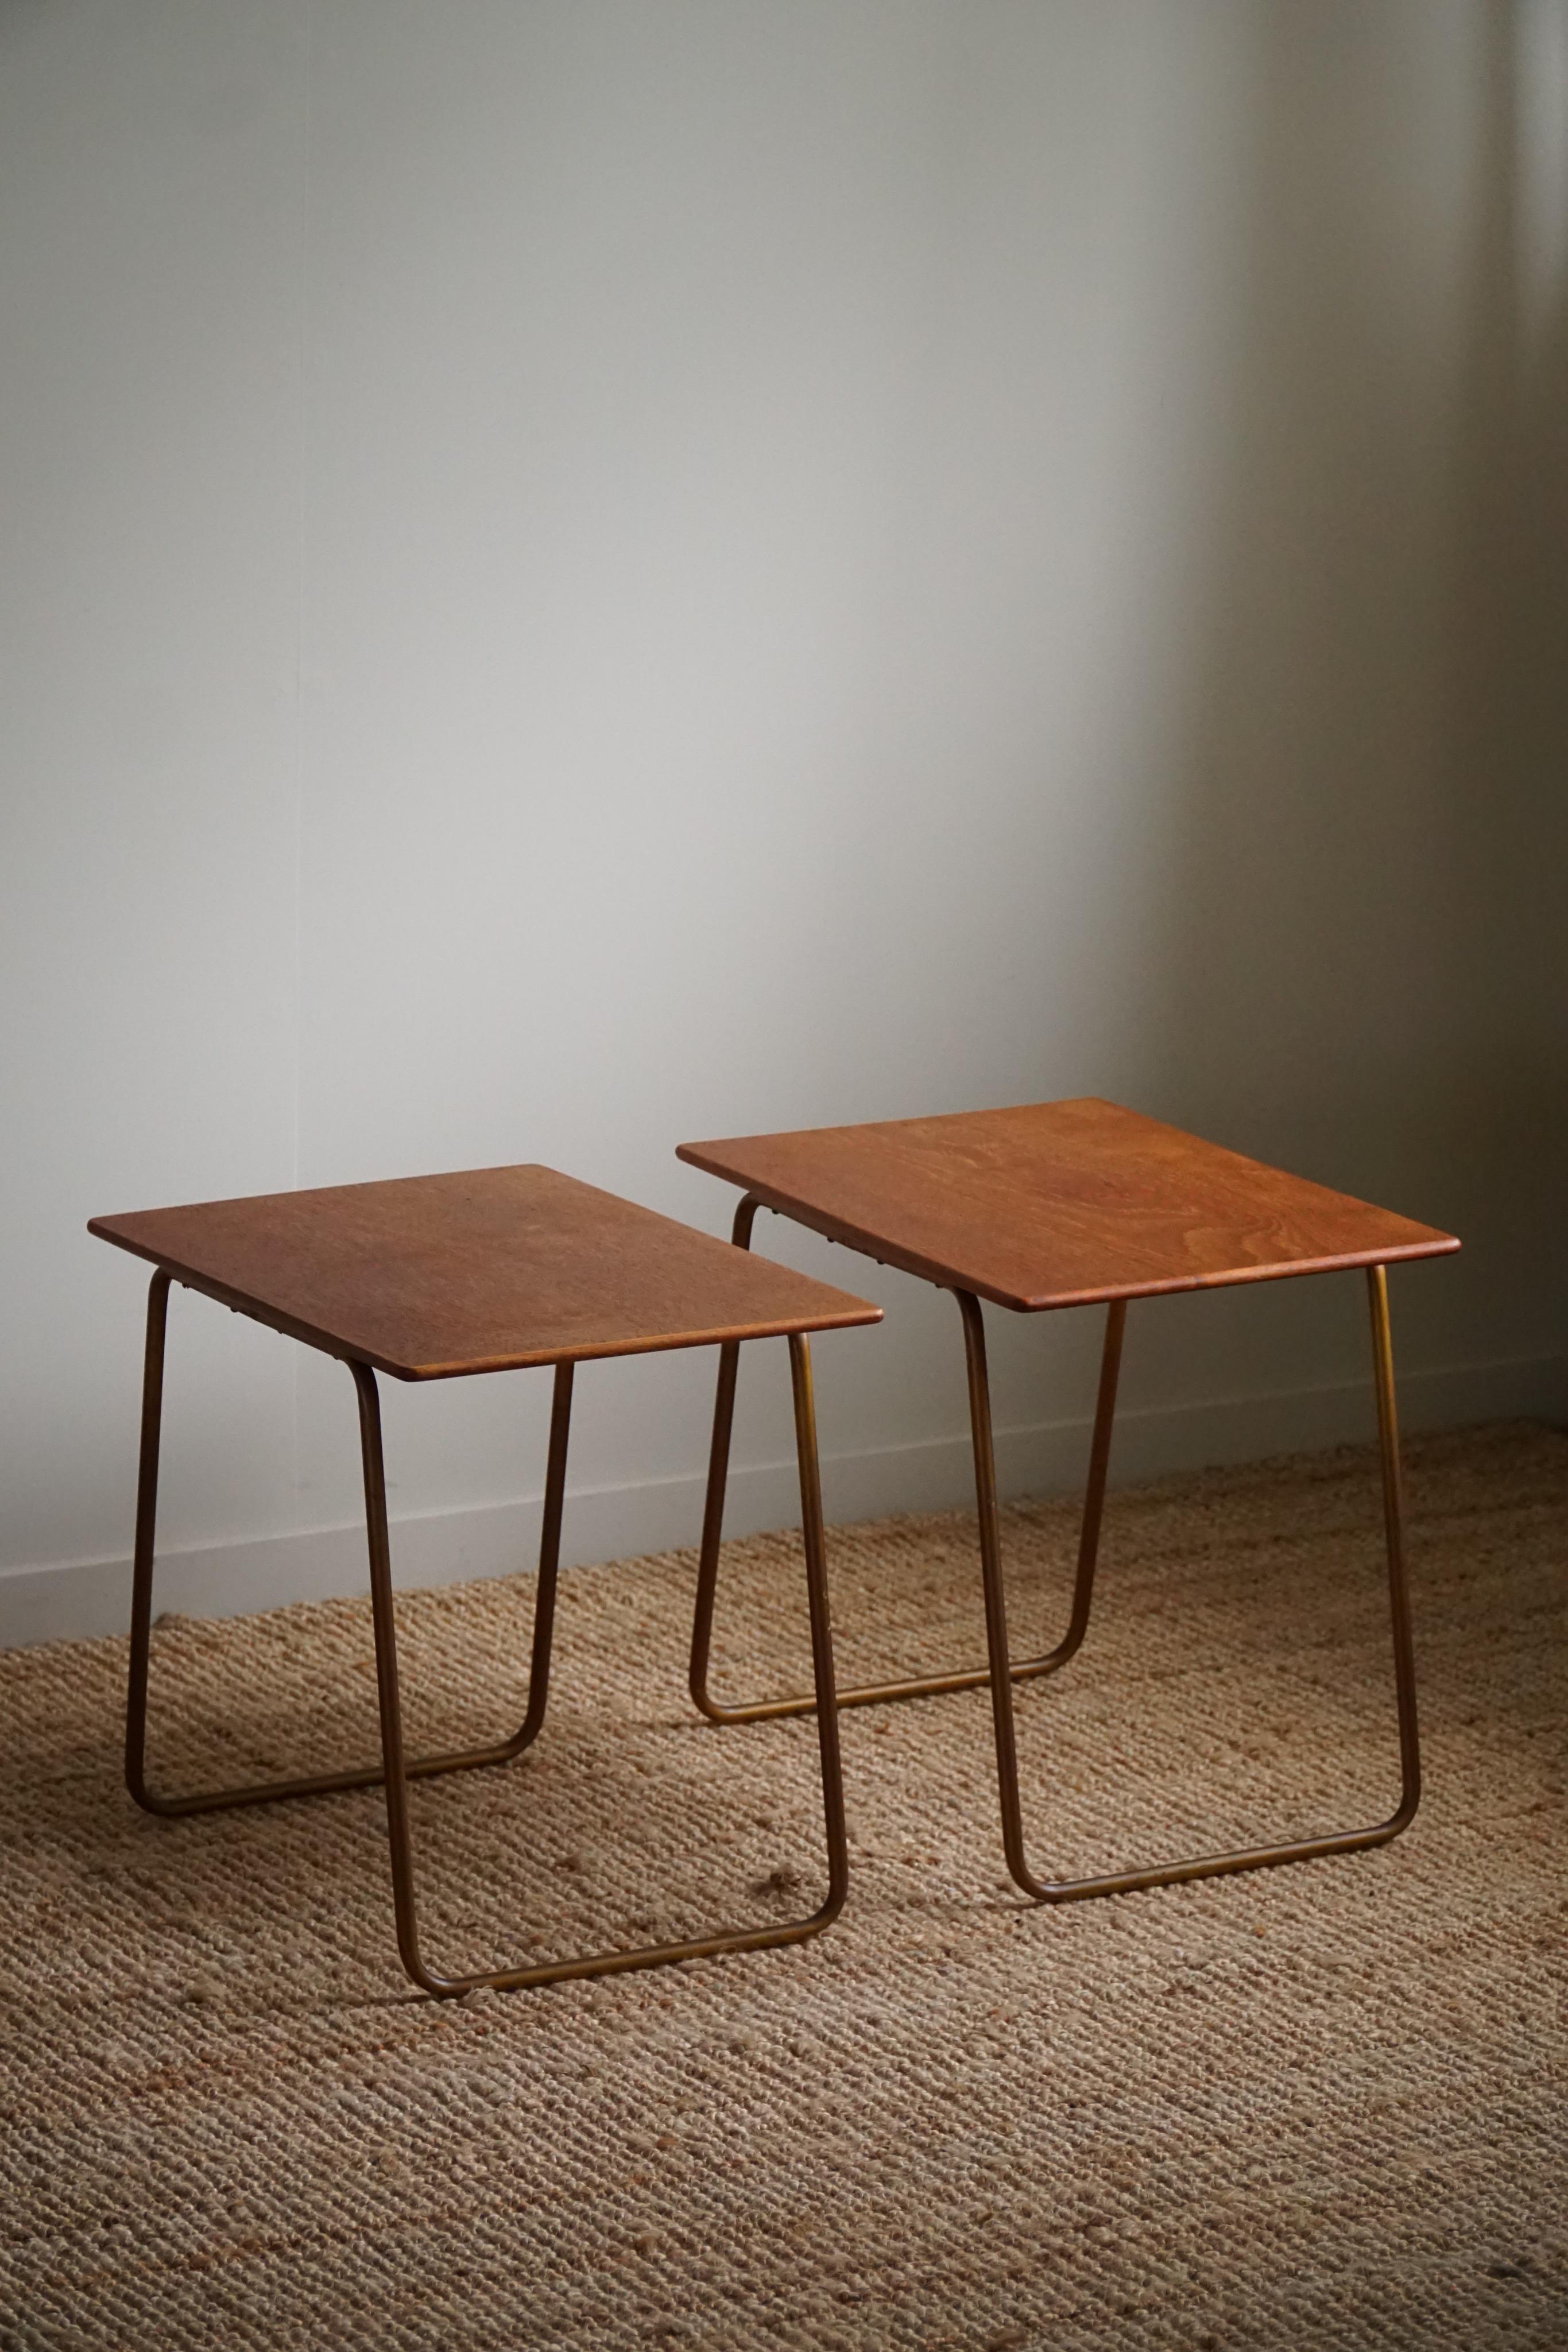 20th Century Pair of Side Tables in Teak and Steel, Danish Mid Century, 1960s For Sale